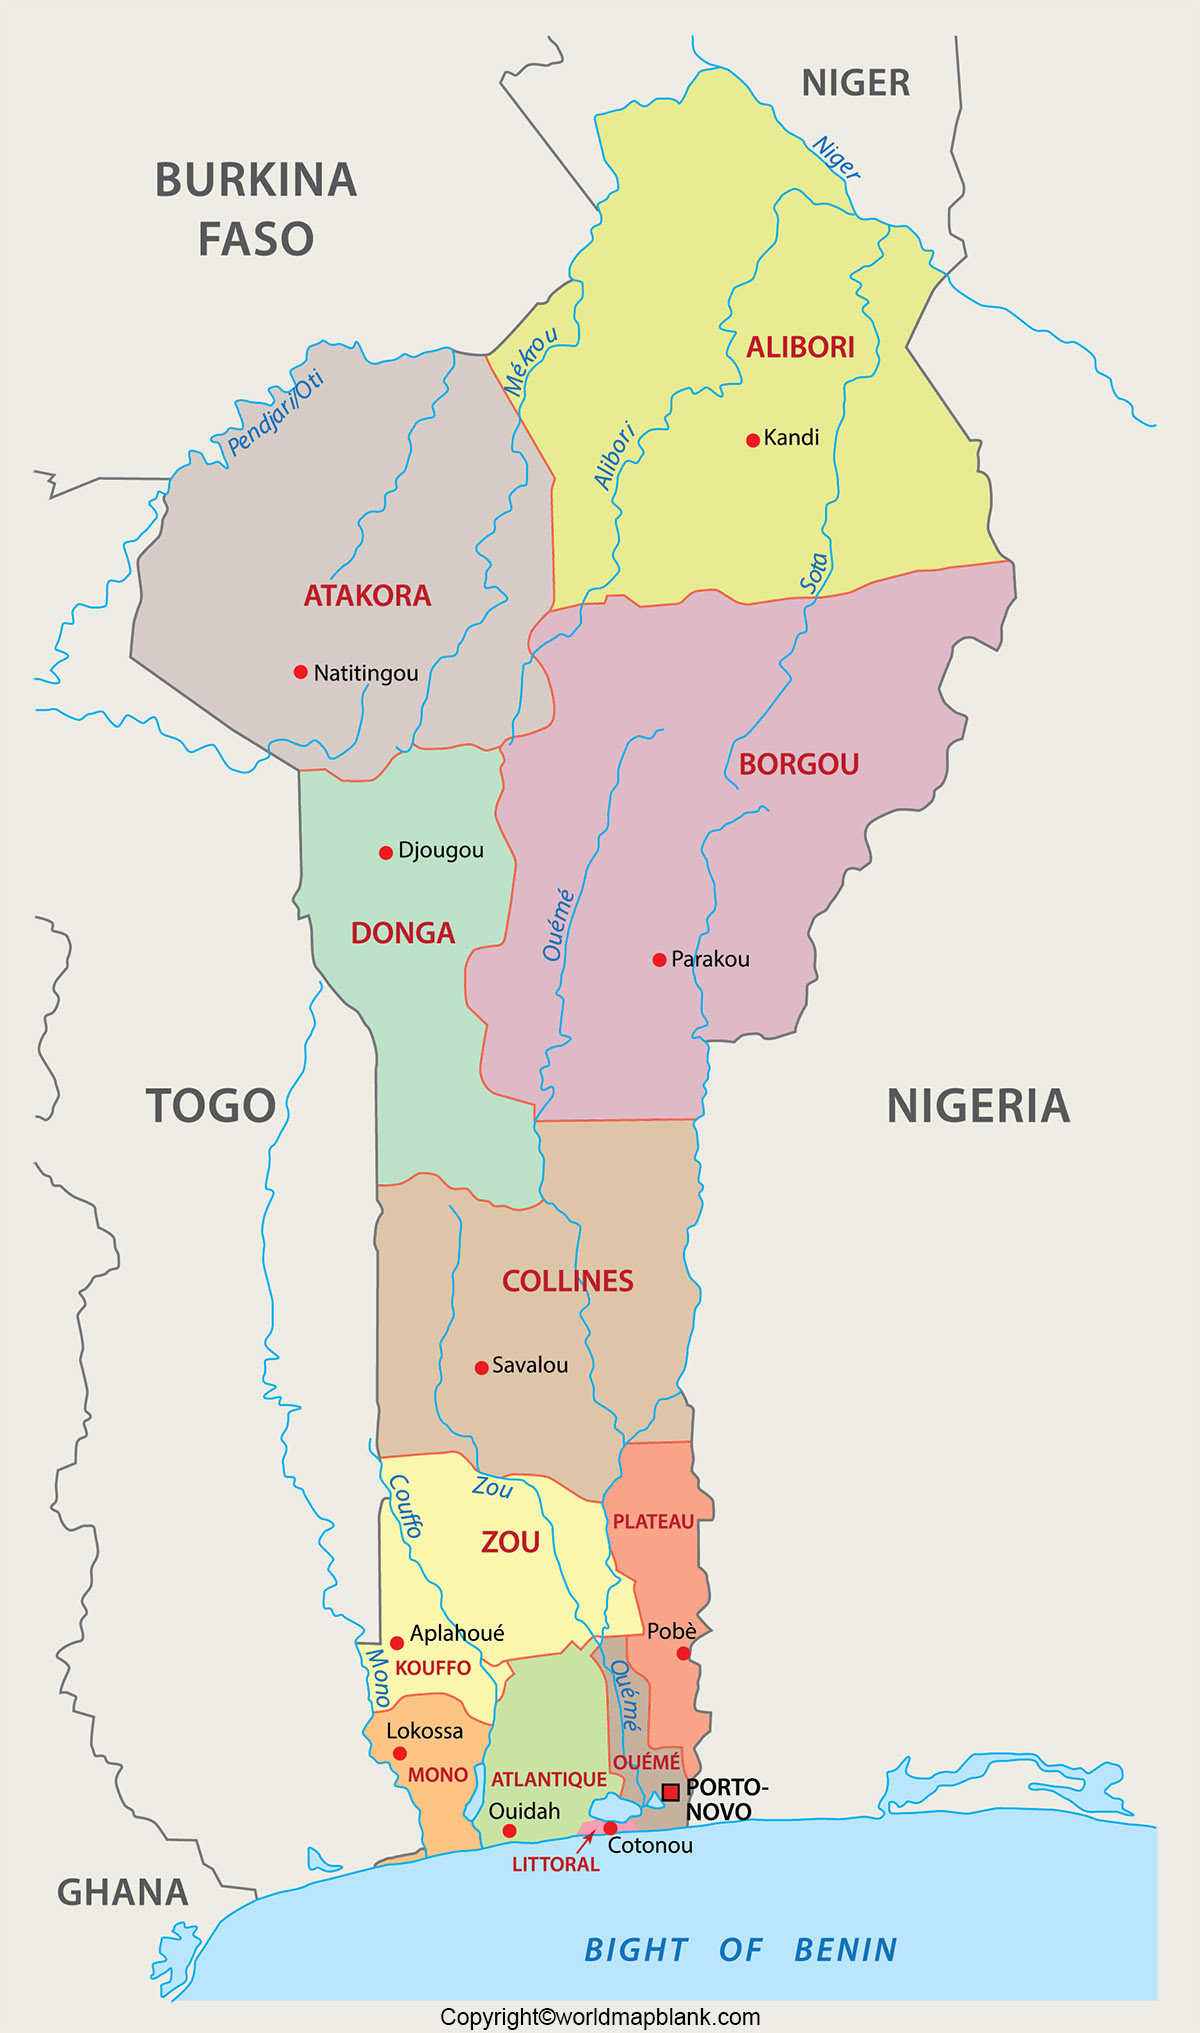 Labeled Map of Benin with States